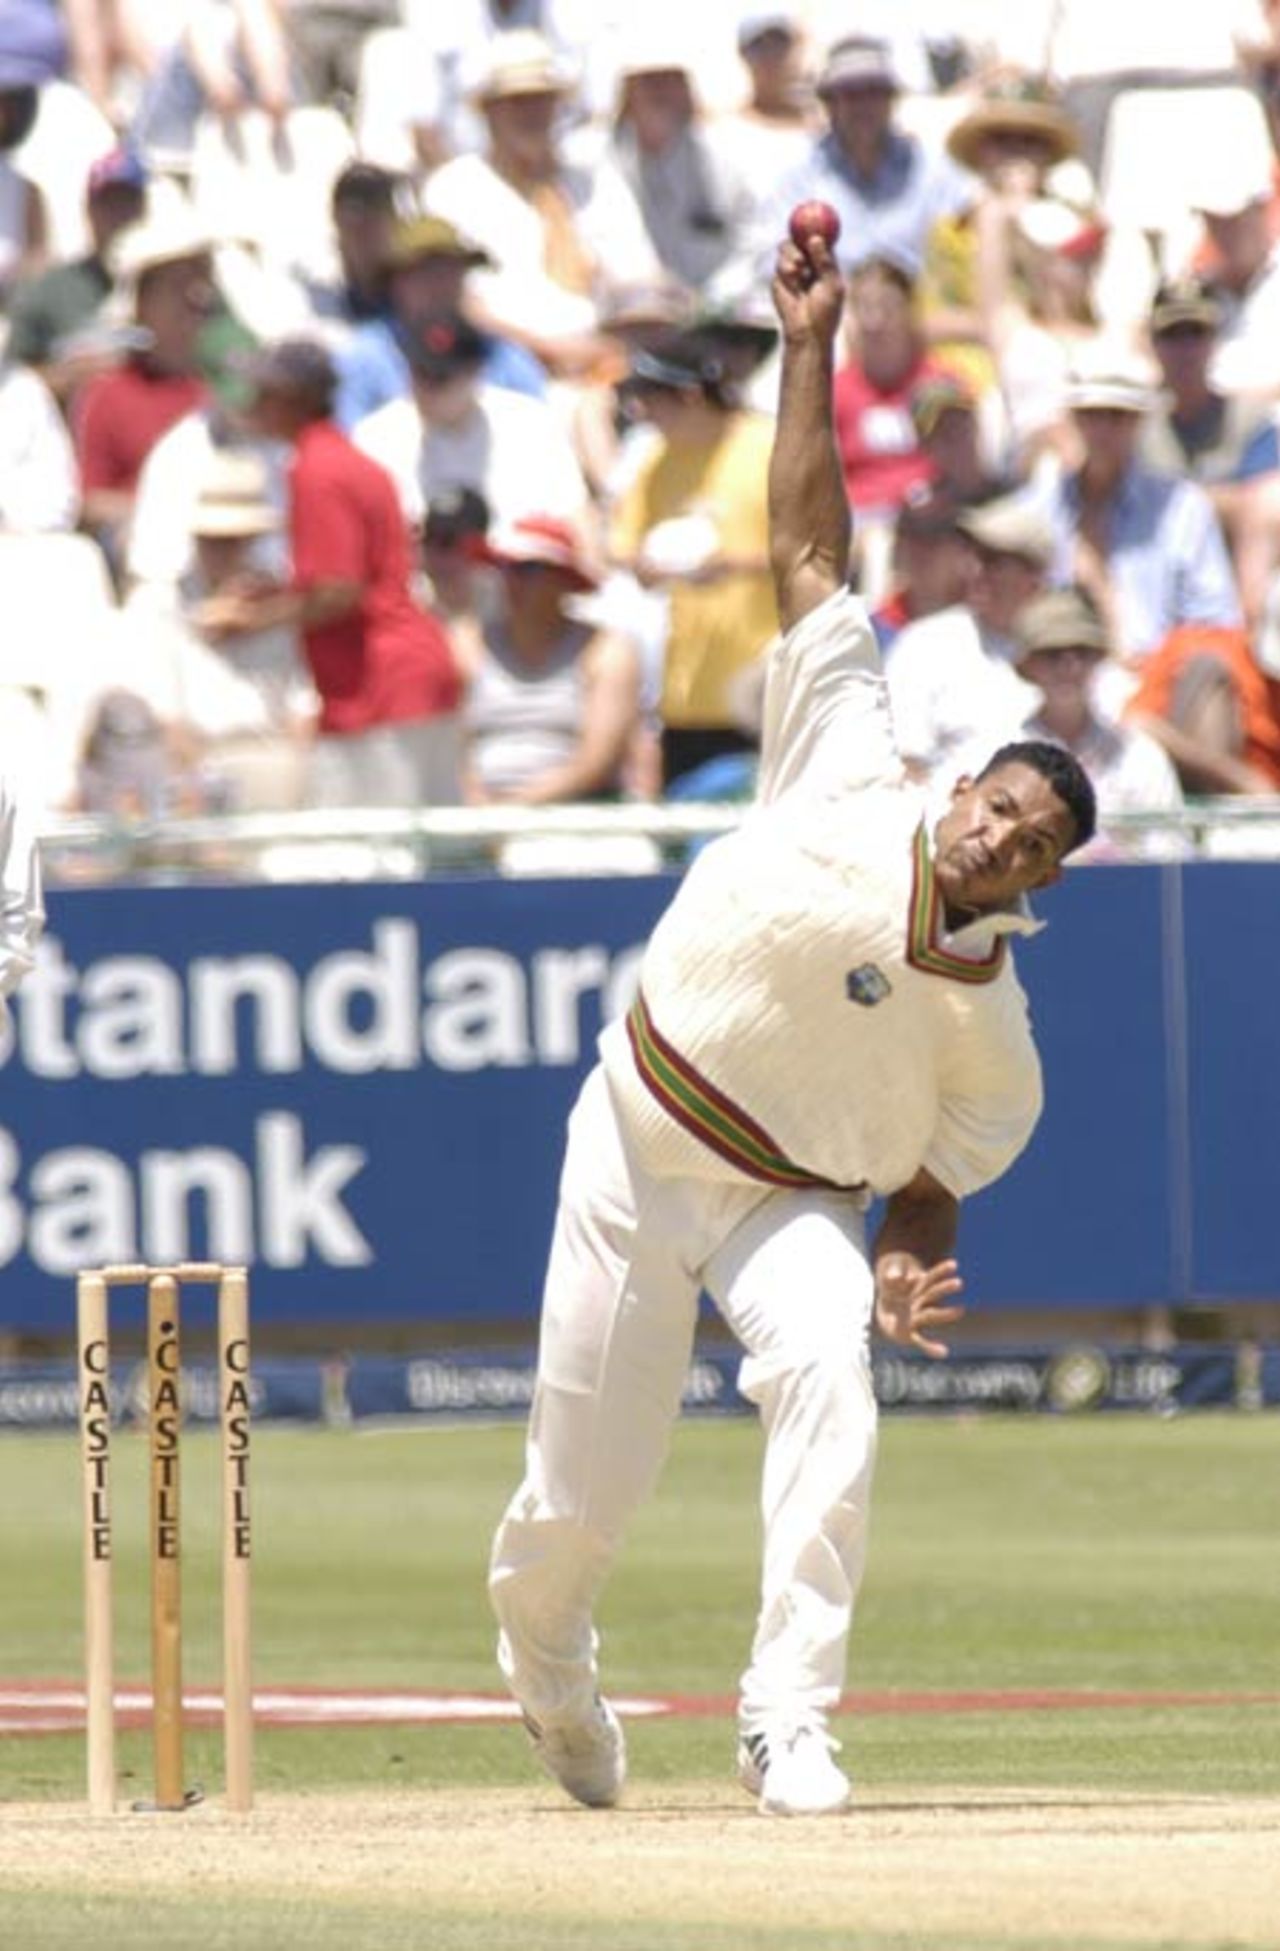 West Indies bowler Adam Sanford sends down a delivery at Newlands at Newlands during the third test